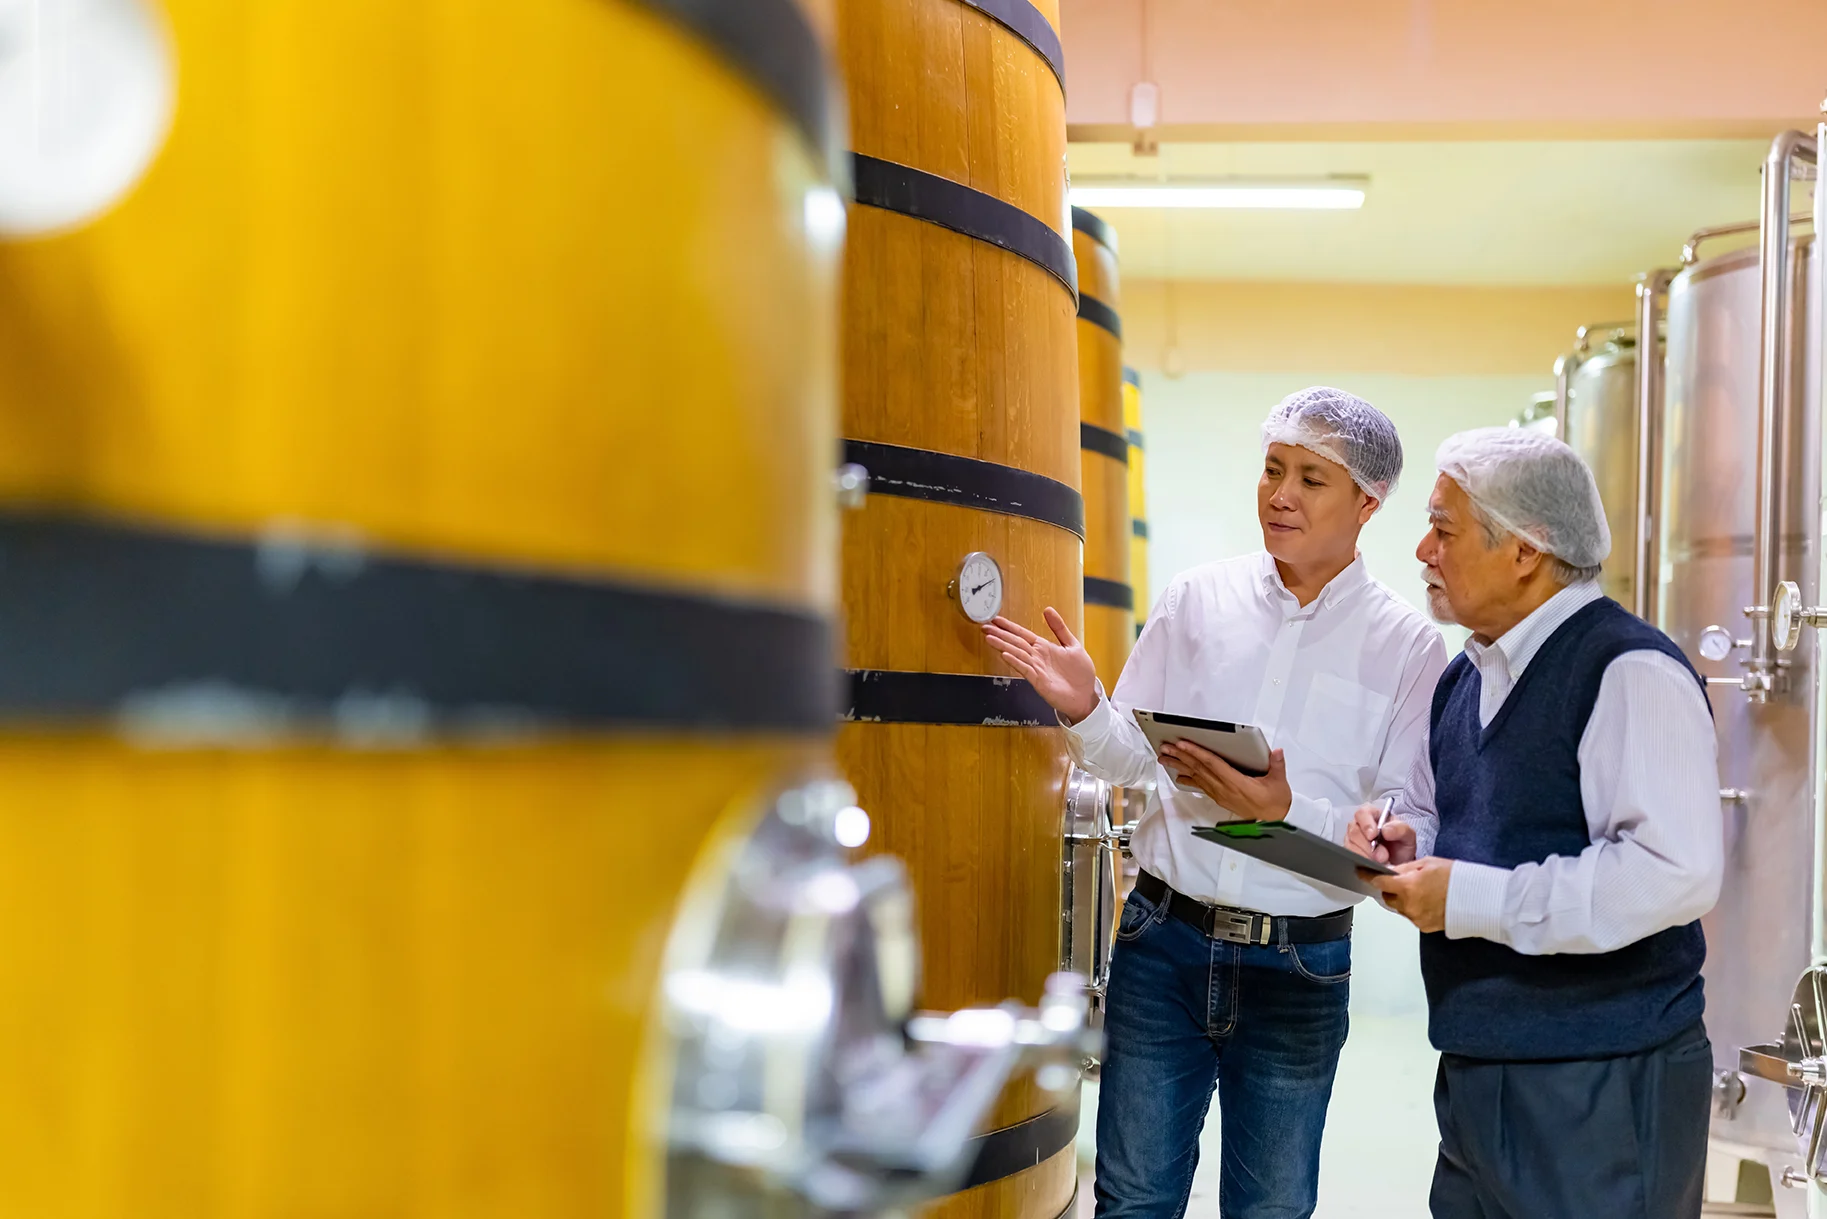 Image of two men wearing hair nets and carrying clipboards, inspecting the gauge on one of many vats of wine.